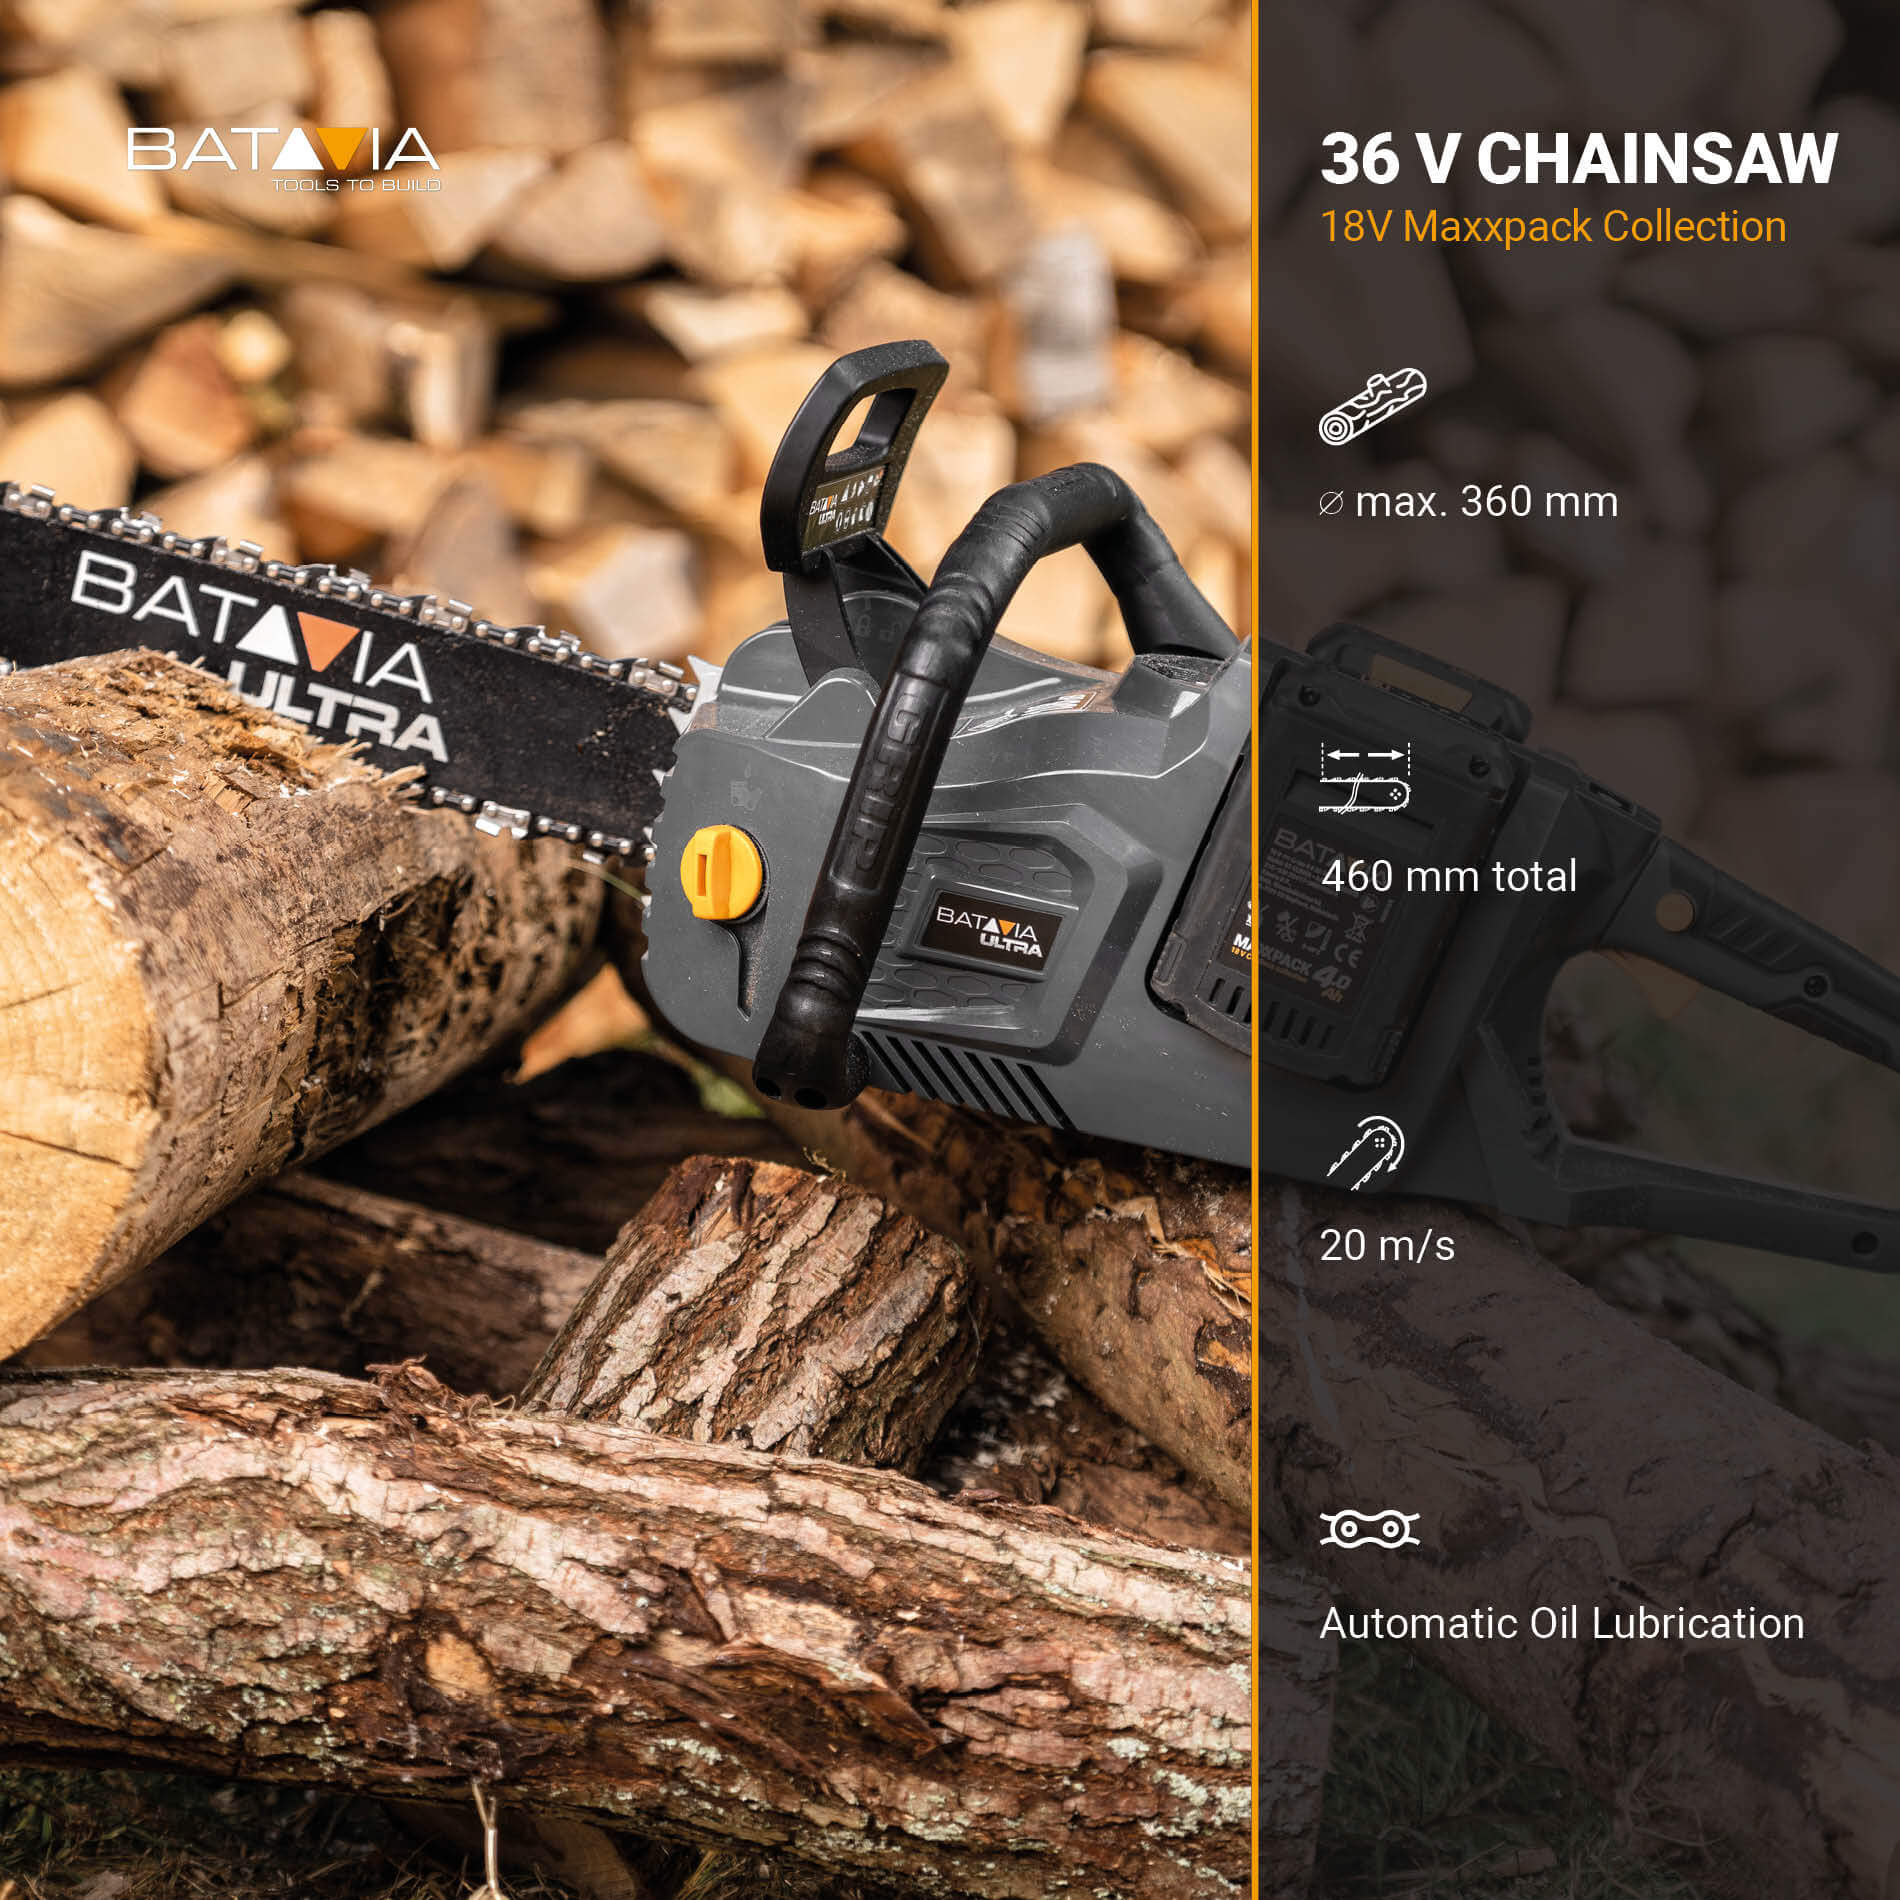 Electric chainsaw | Maxxpack collection | Batavia